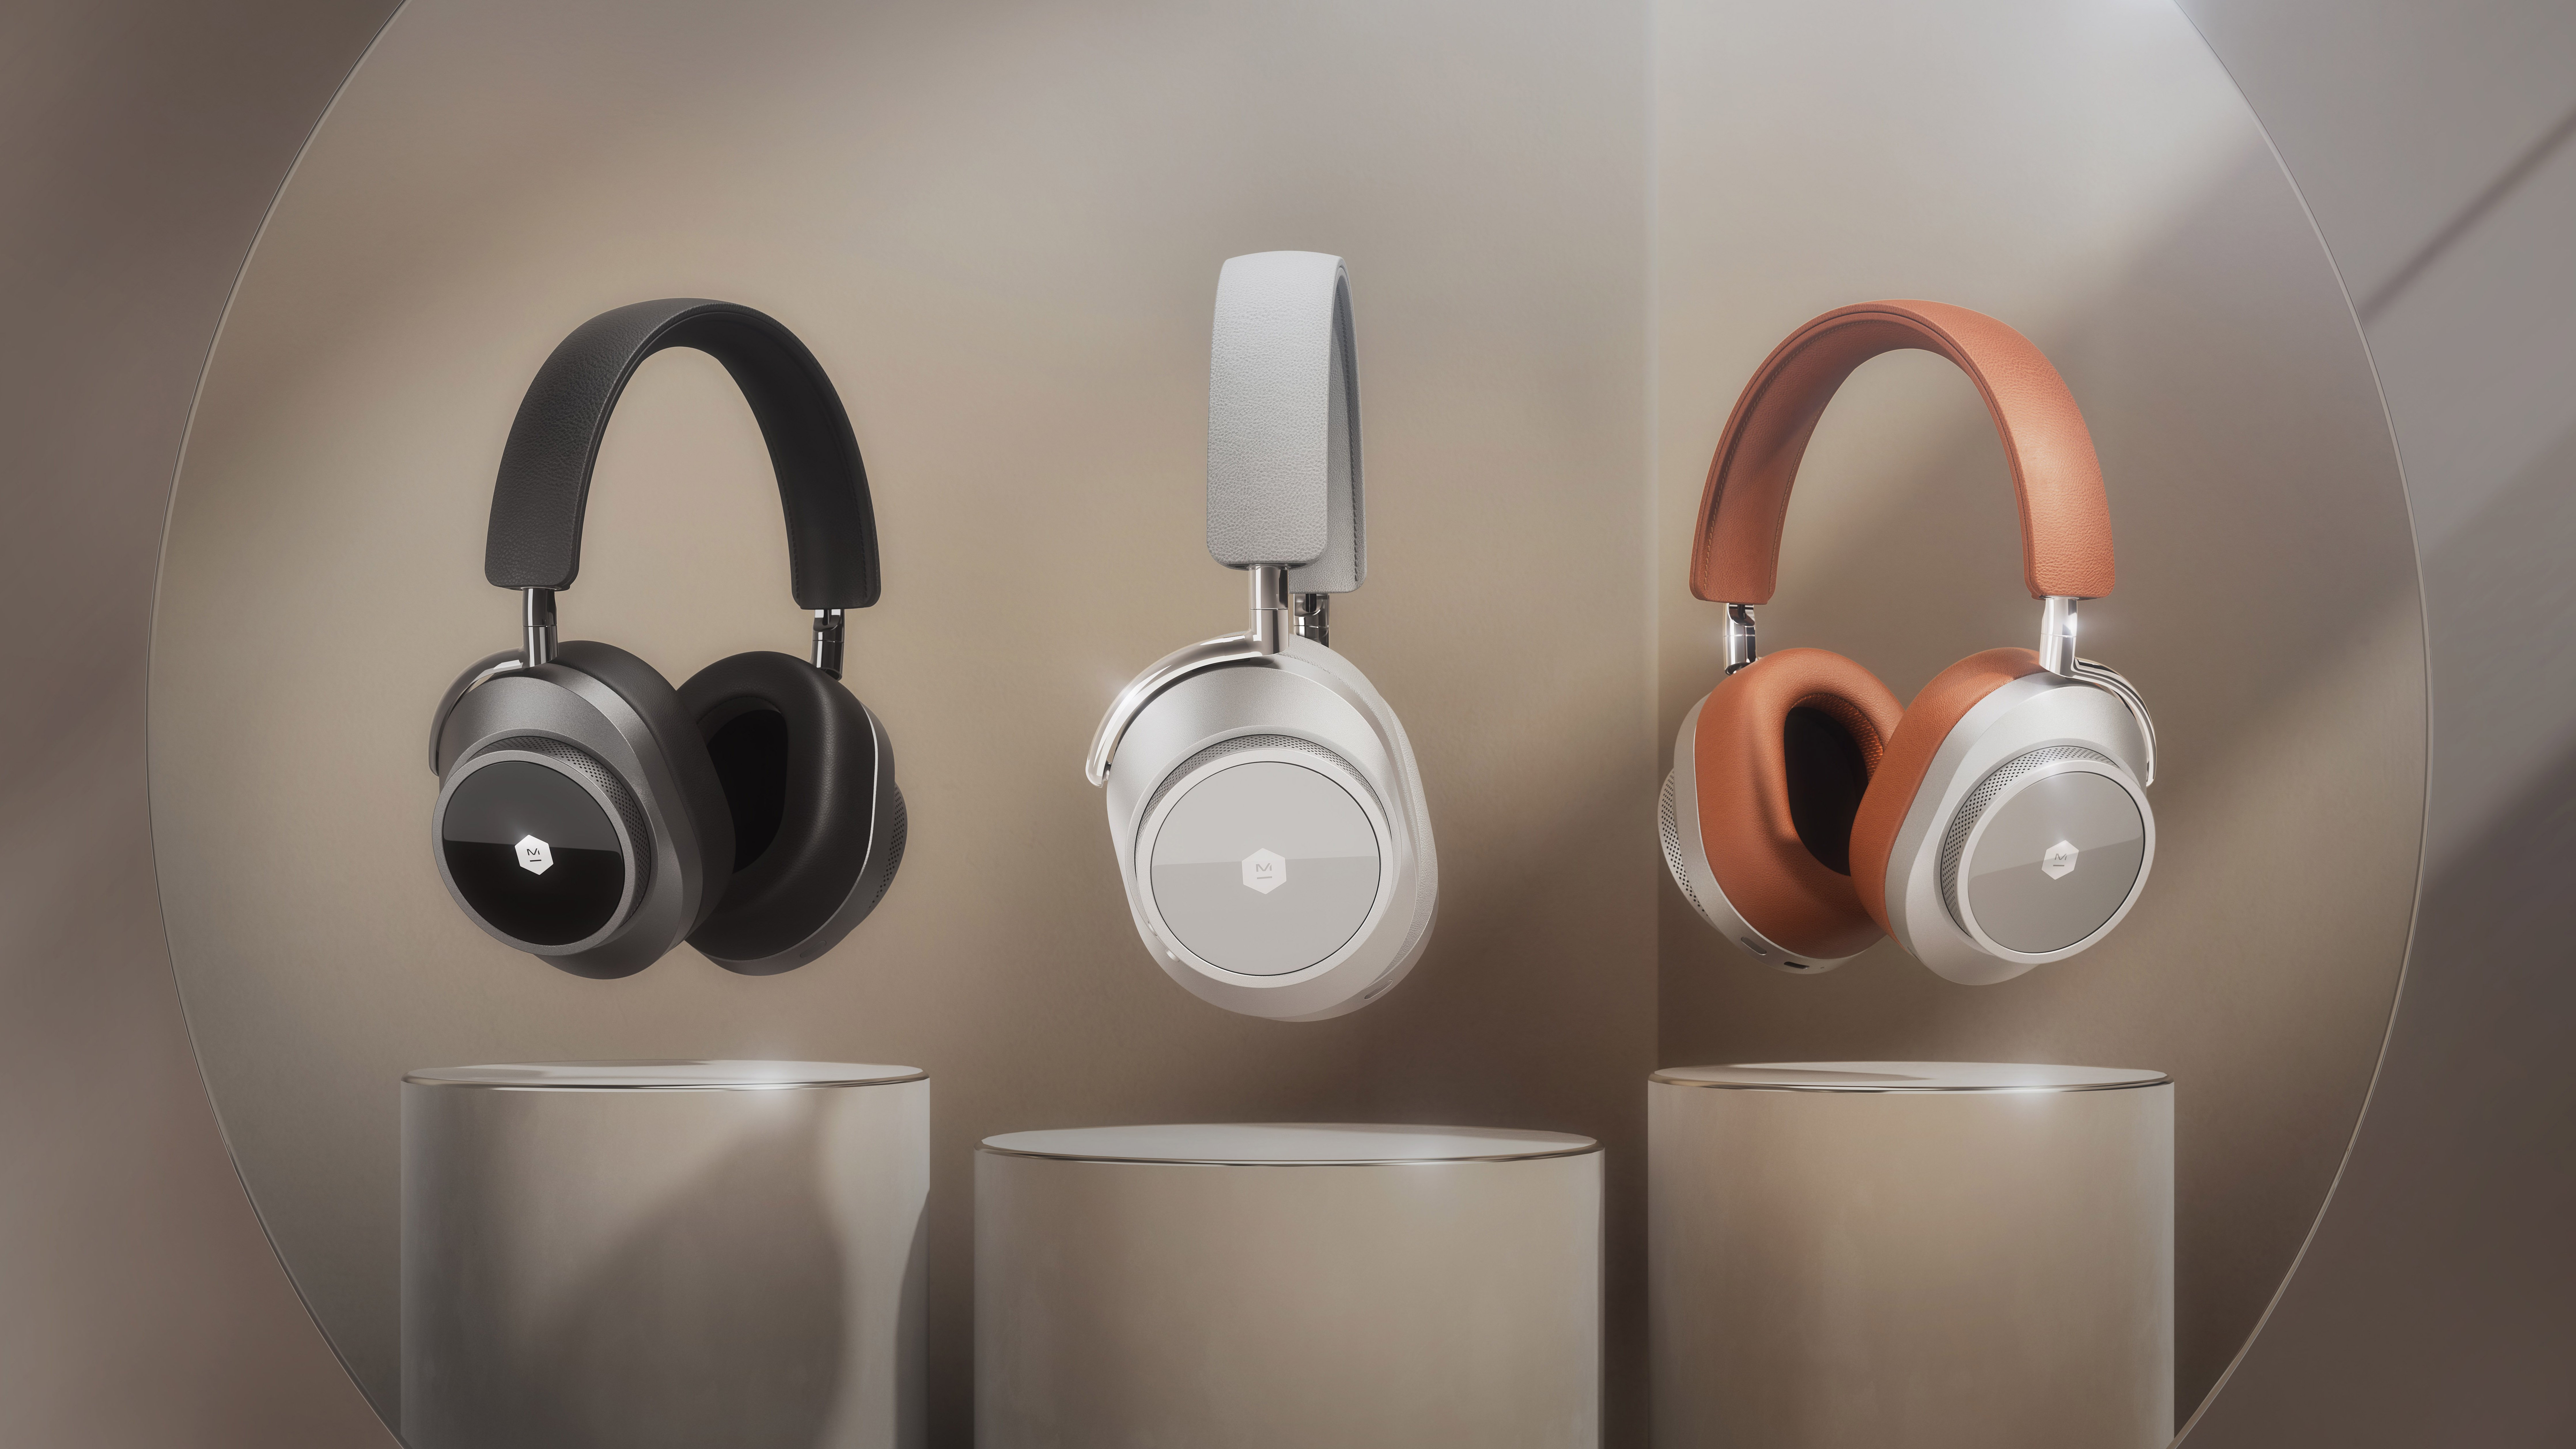 Introducing MW75 Active Noise-Cancelling Wireless Headphones